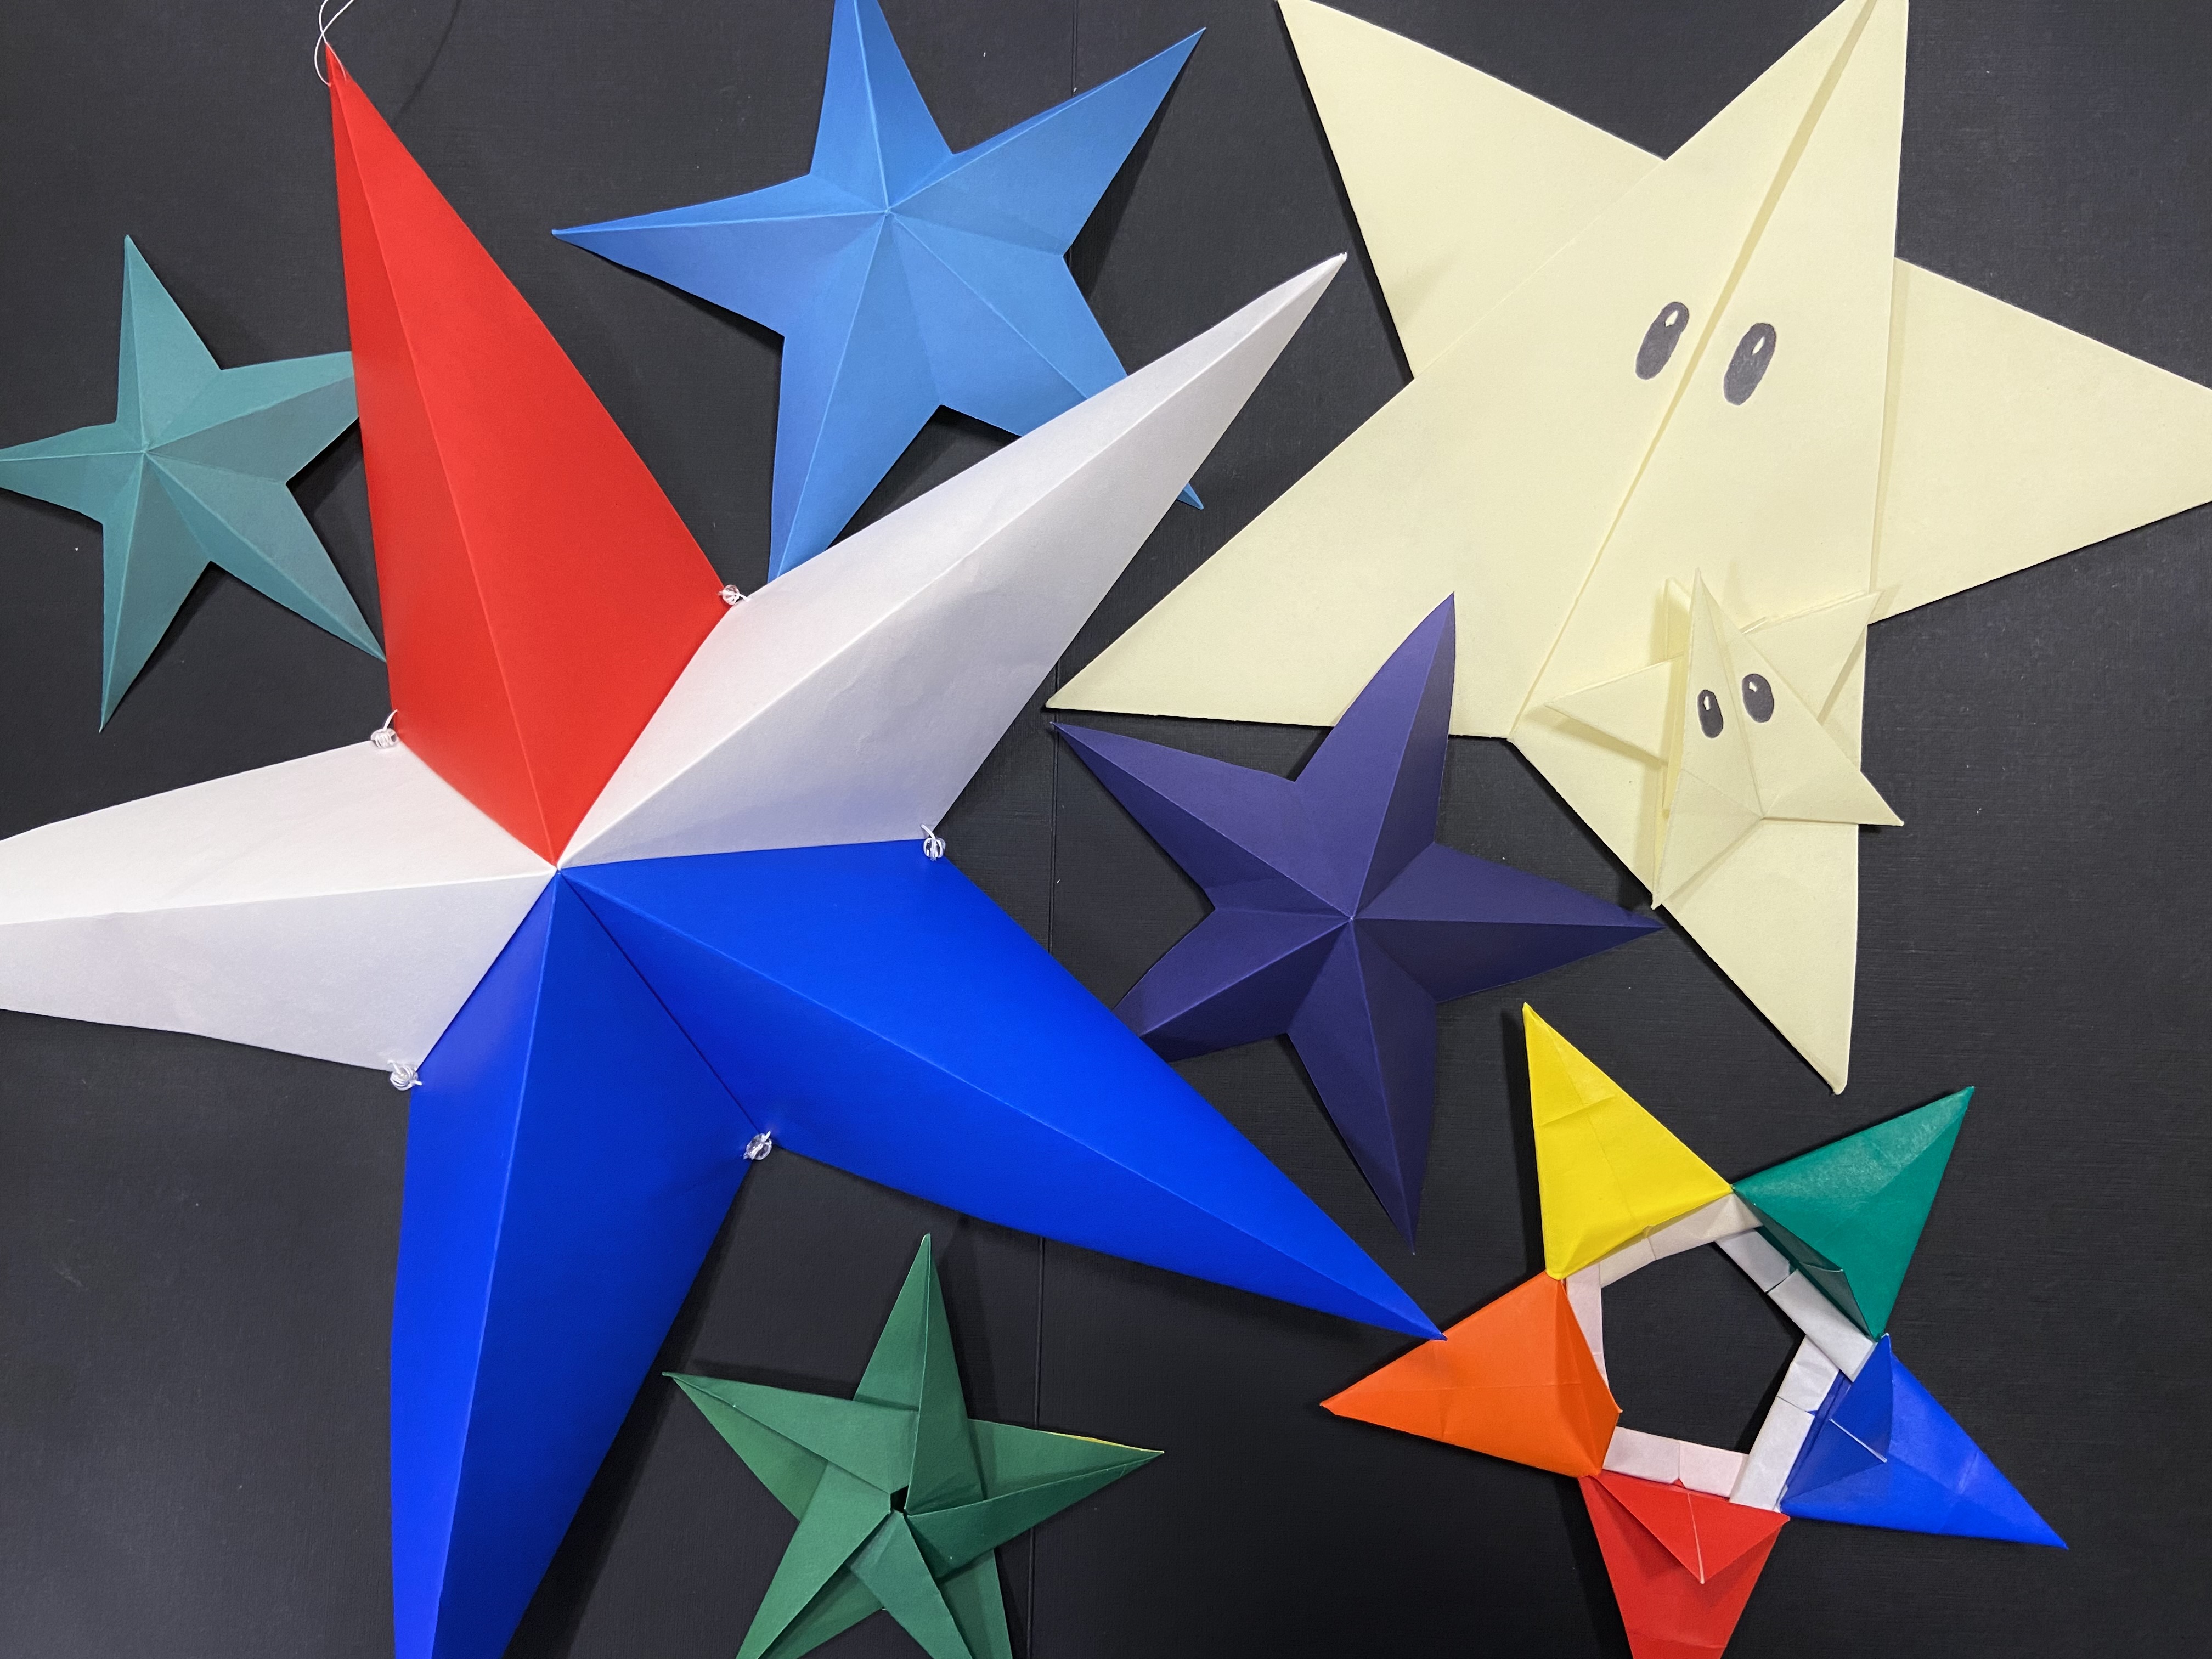 Decorative stars cut from colorful paper